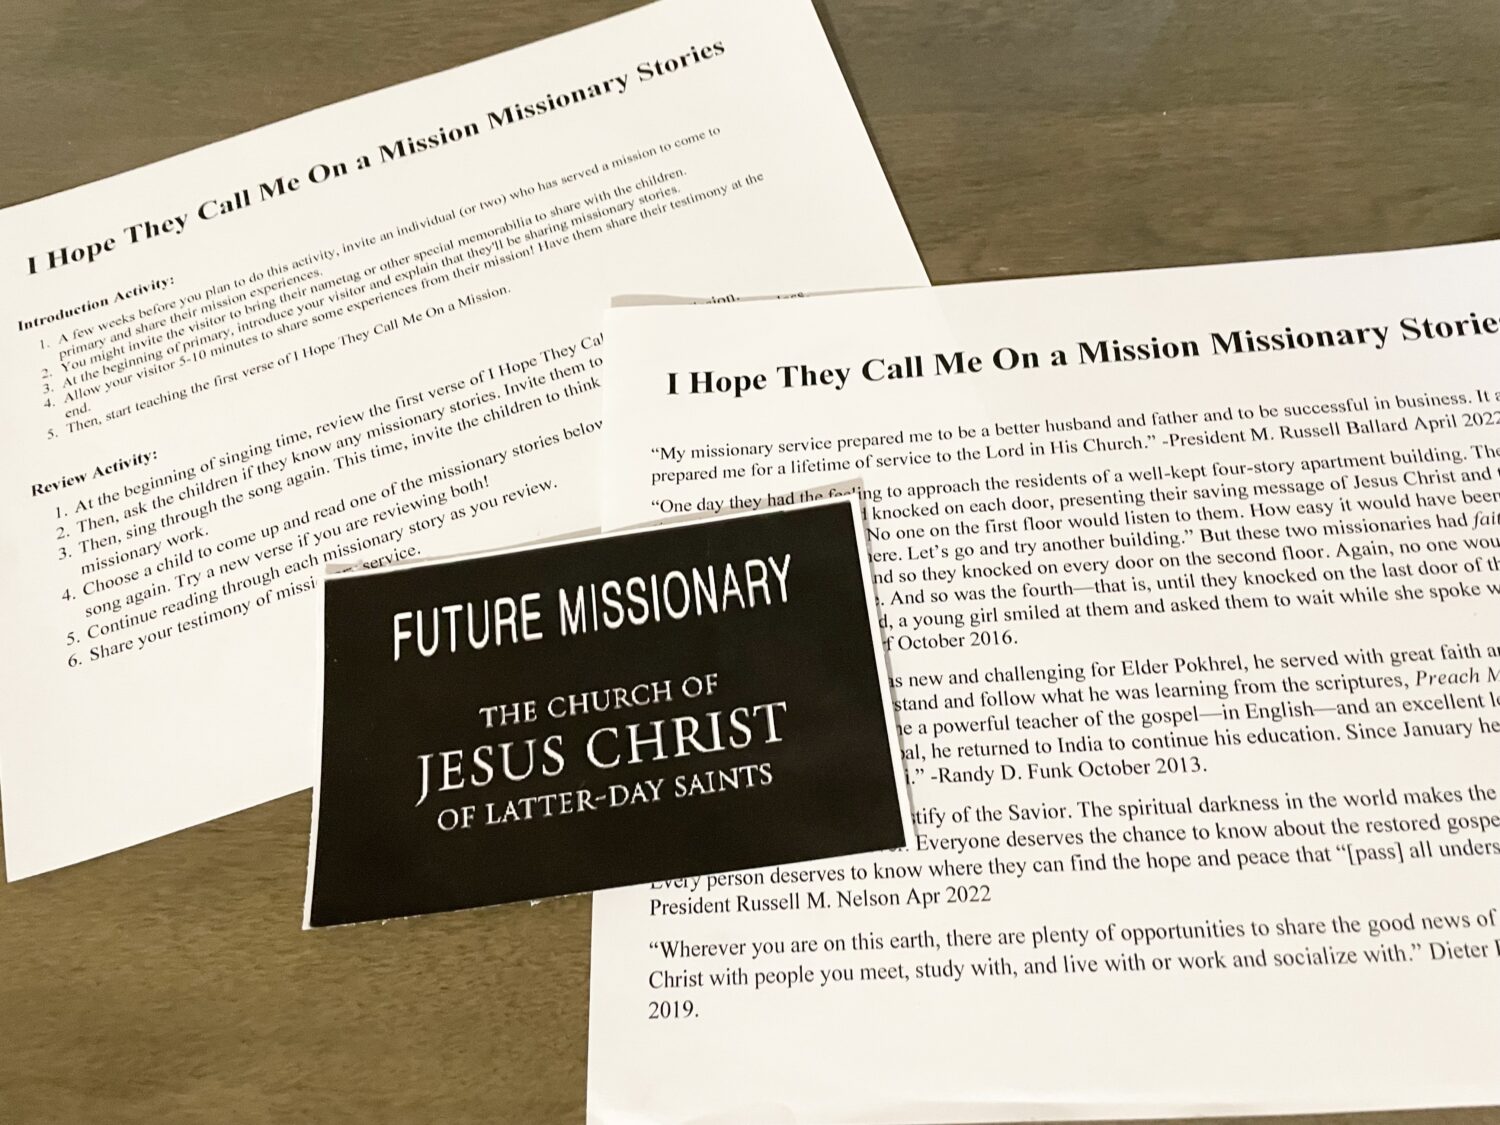 I Hope They Call Me On a Mission Missionary Stories Easy singing time ideas for Primary Music Leaders IMG 7261